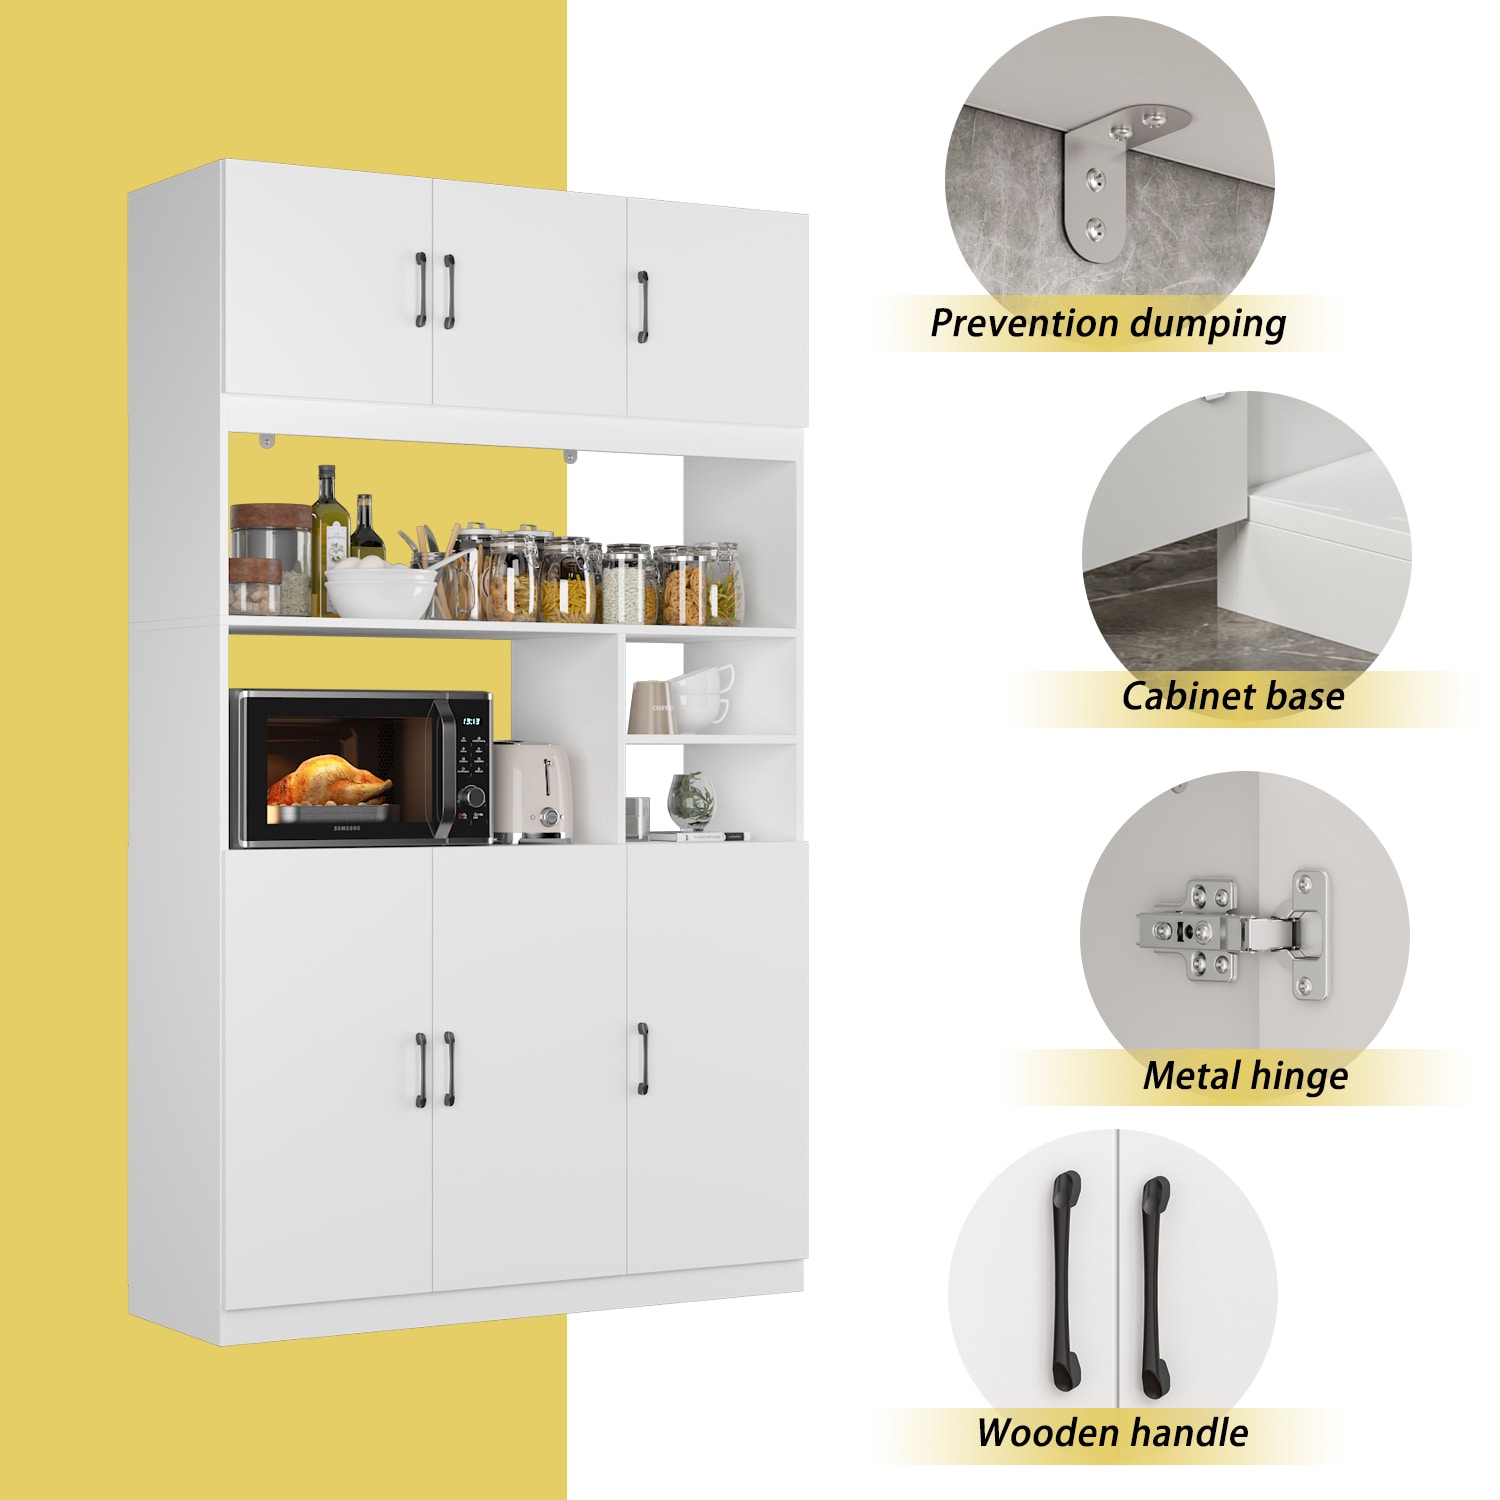 FUFU&GAGA 6-Door Kitchen Pantry Cabinet Storage Hutch with Microwave Stand in White | LJY-KF020261-01+02